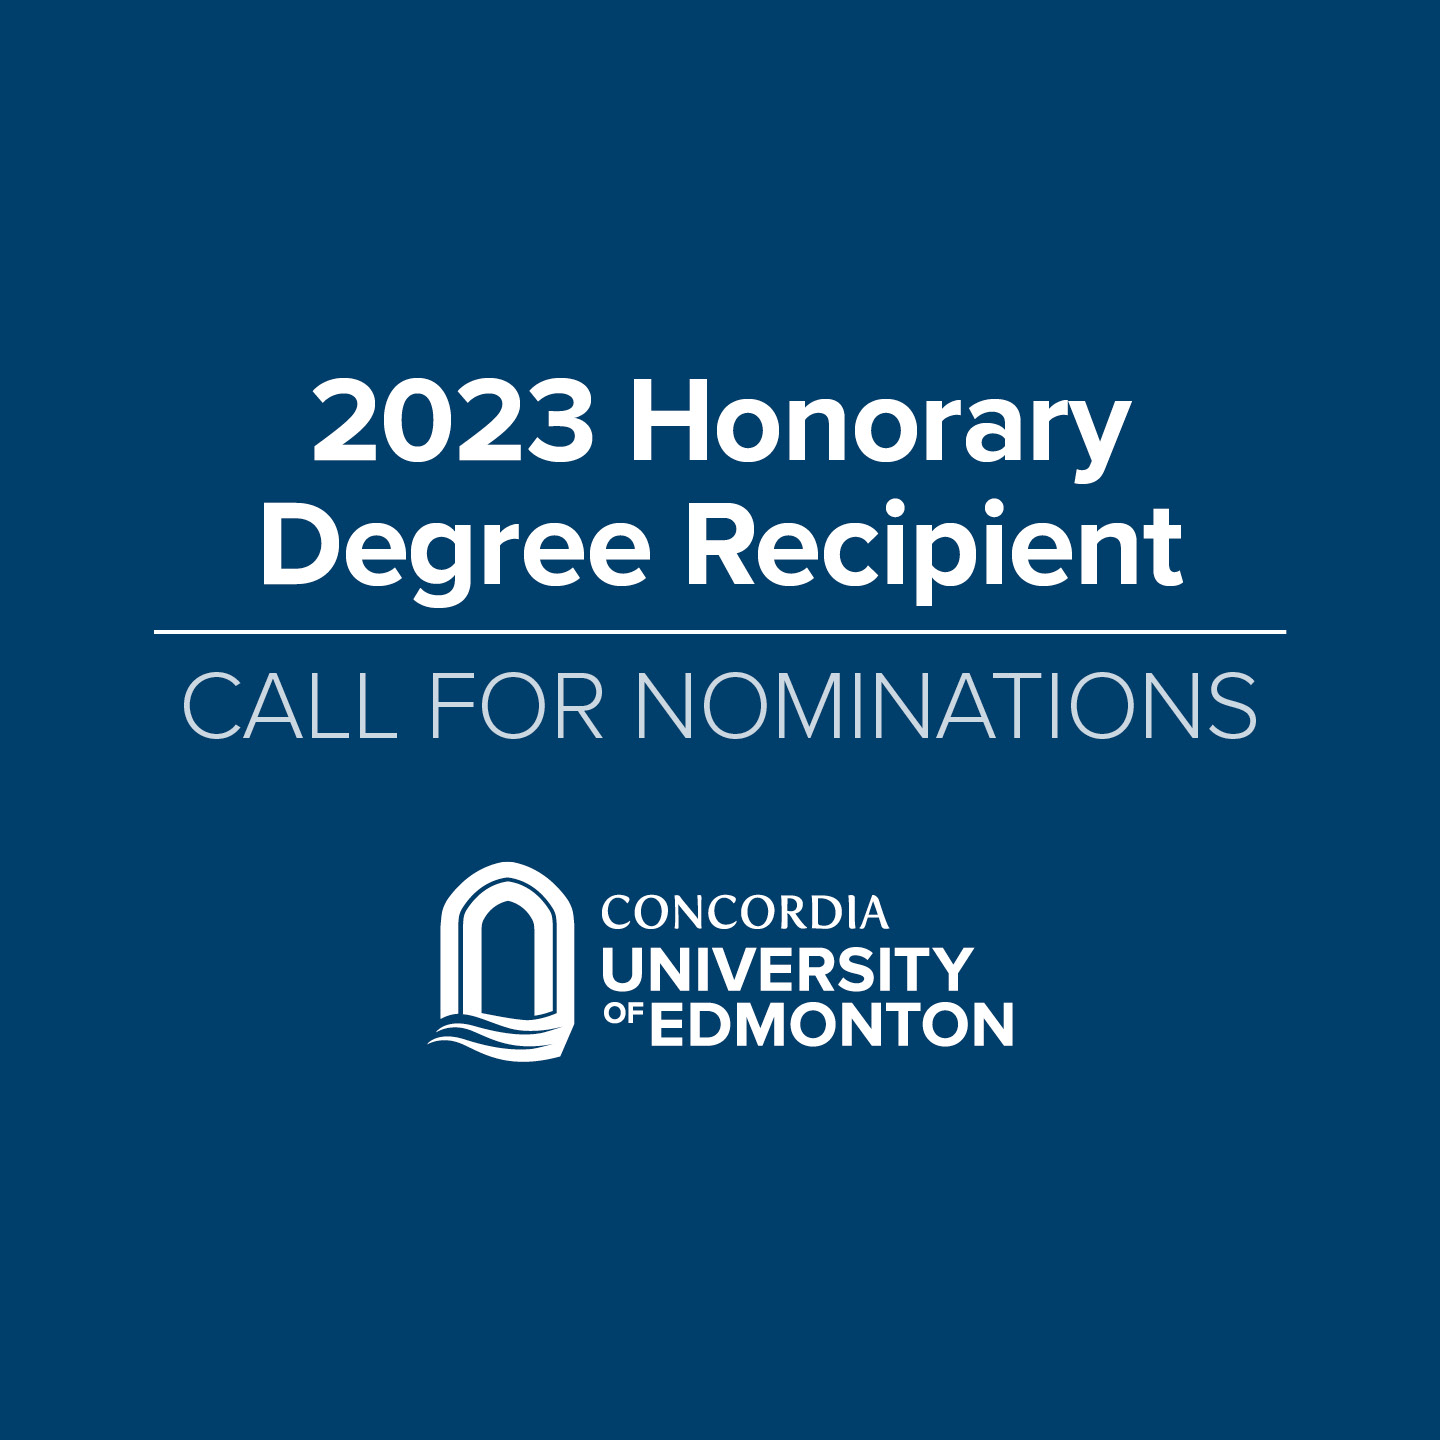 Who will be our 2023 Honorary Degree Recipient?